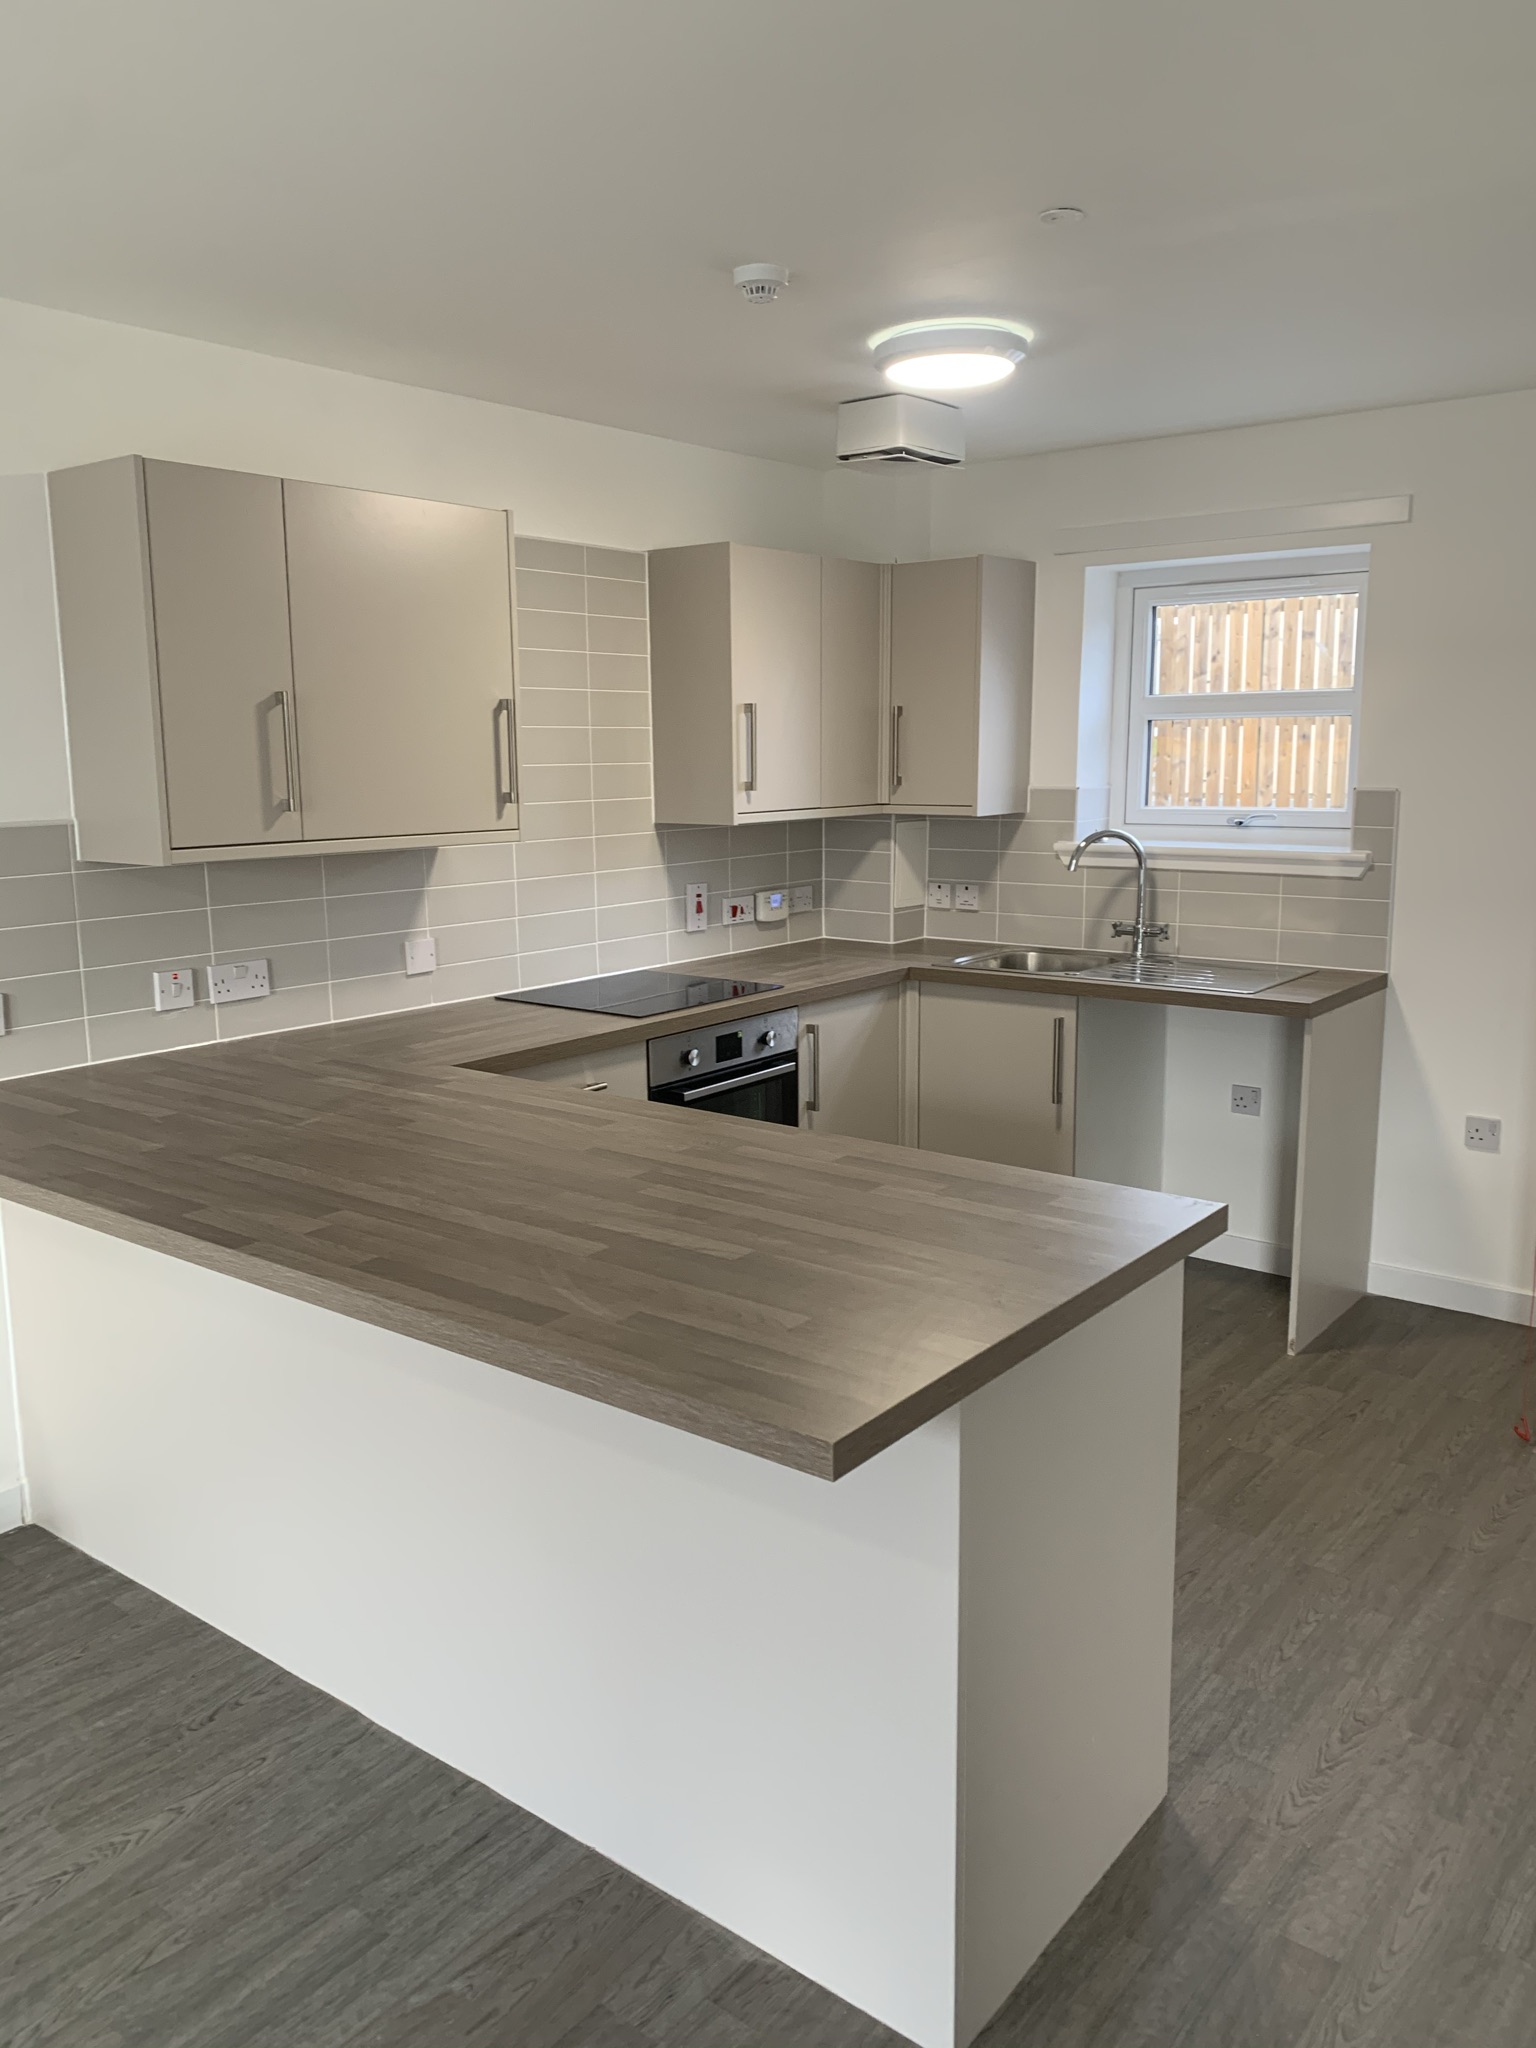 New council homes completed in Dalry